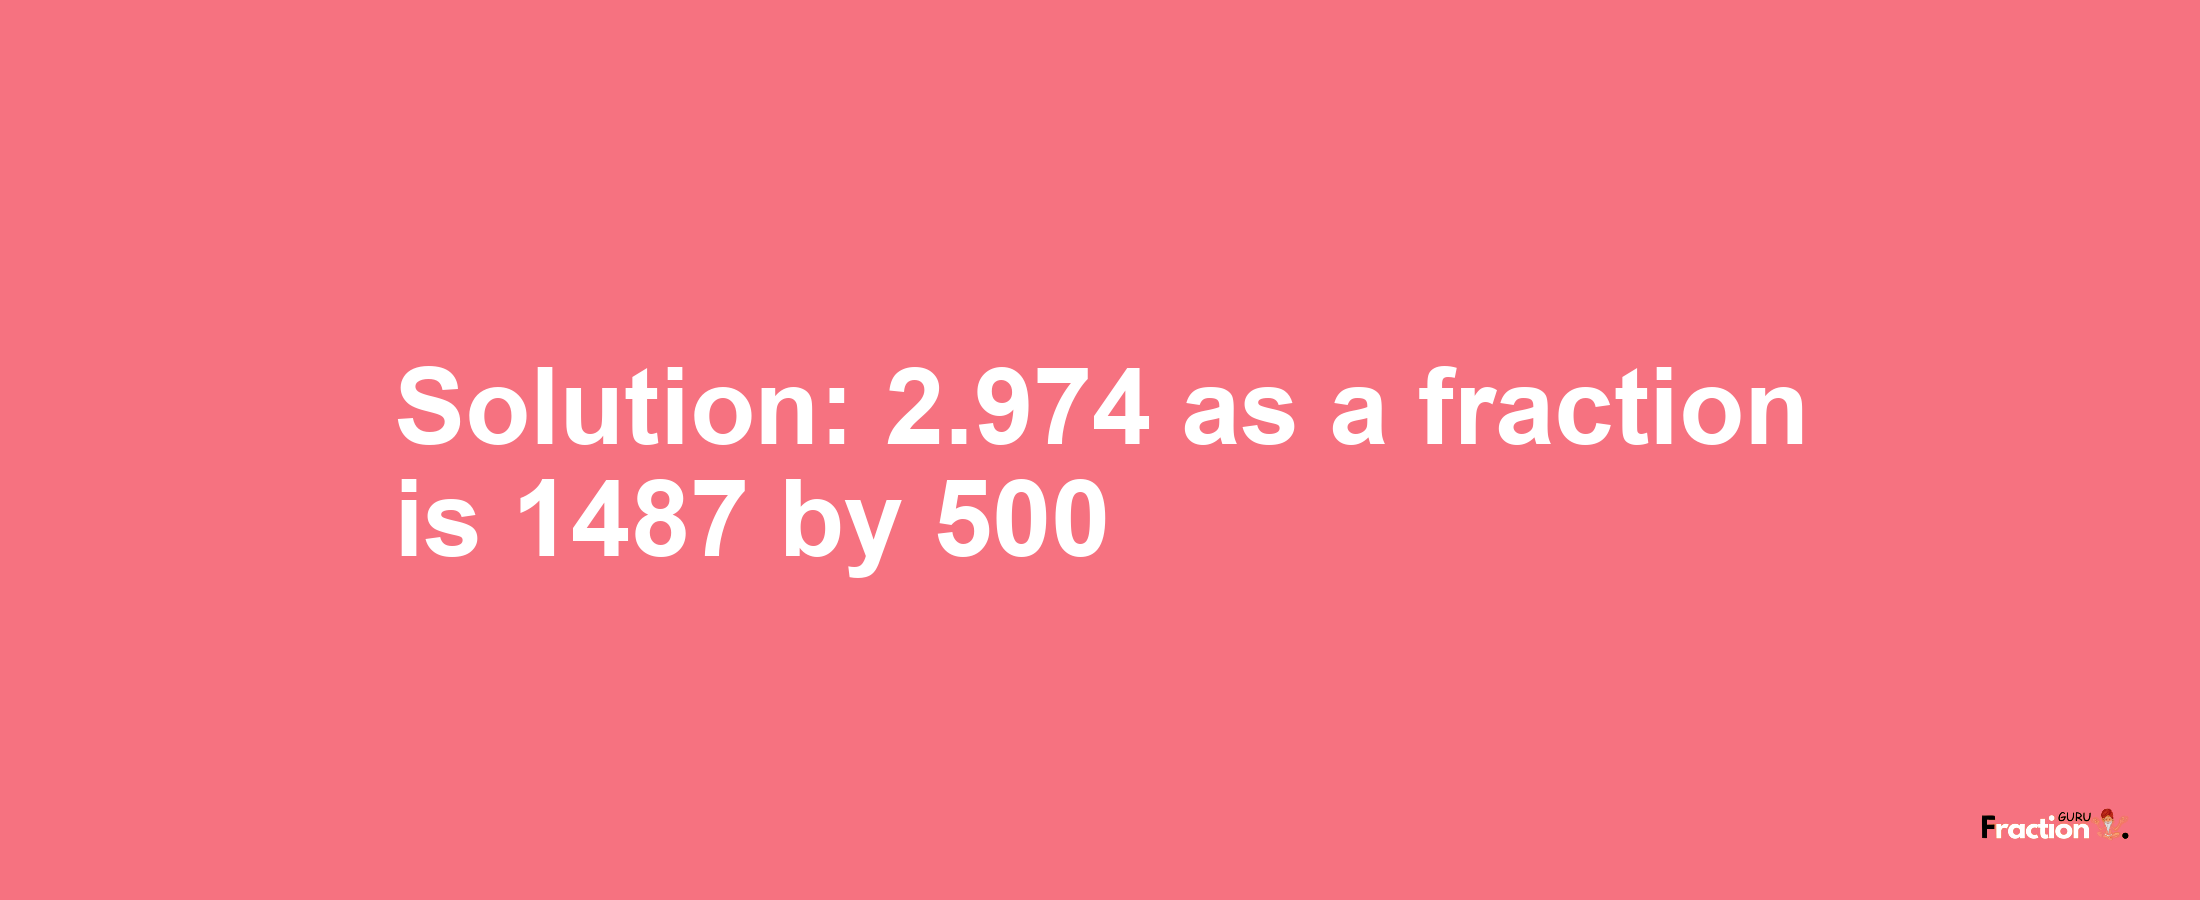 Solution:2.974 as a fraction is 1487/500